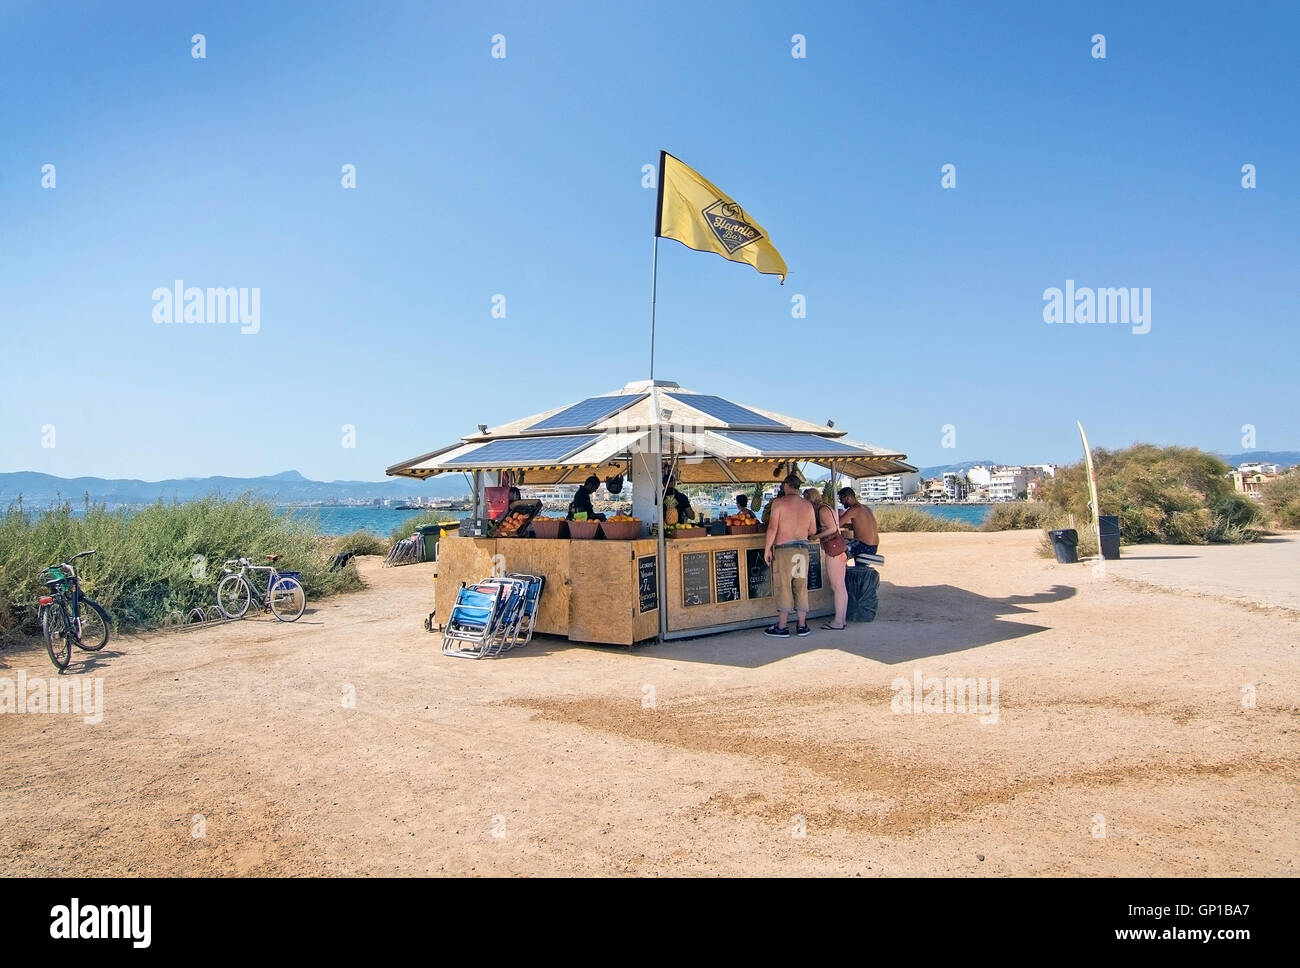 Small beach hut cafe along outdoor bicycling track on a sunny day on July 30, 2016 in Palma de Mallorca, Balearic islands, Spain Stock Photo